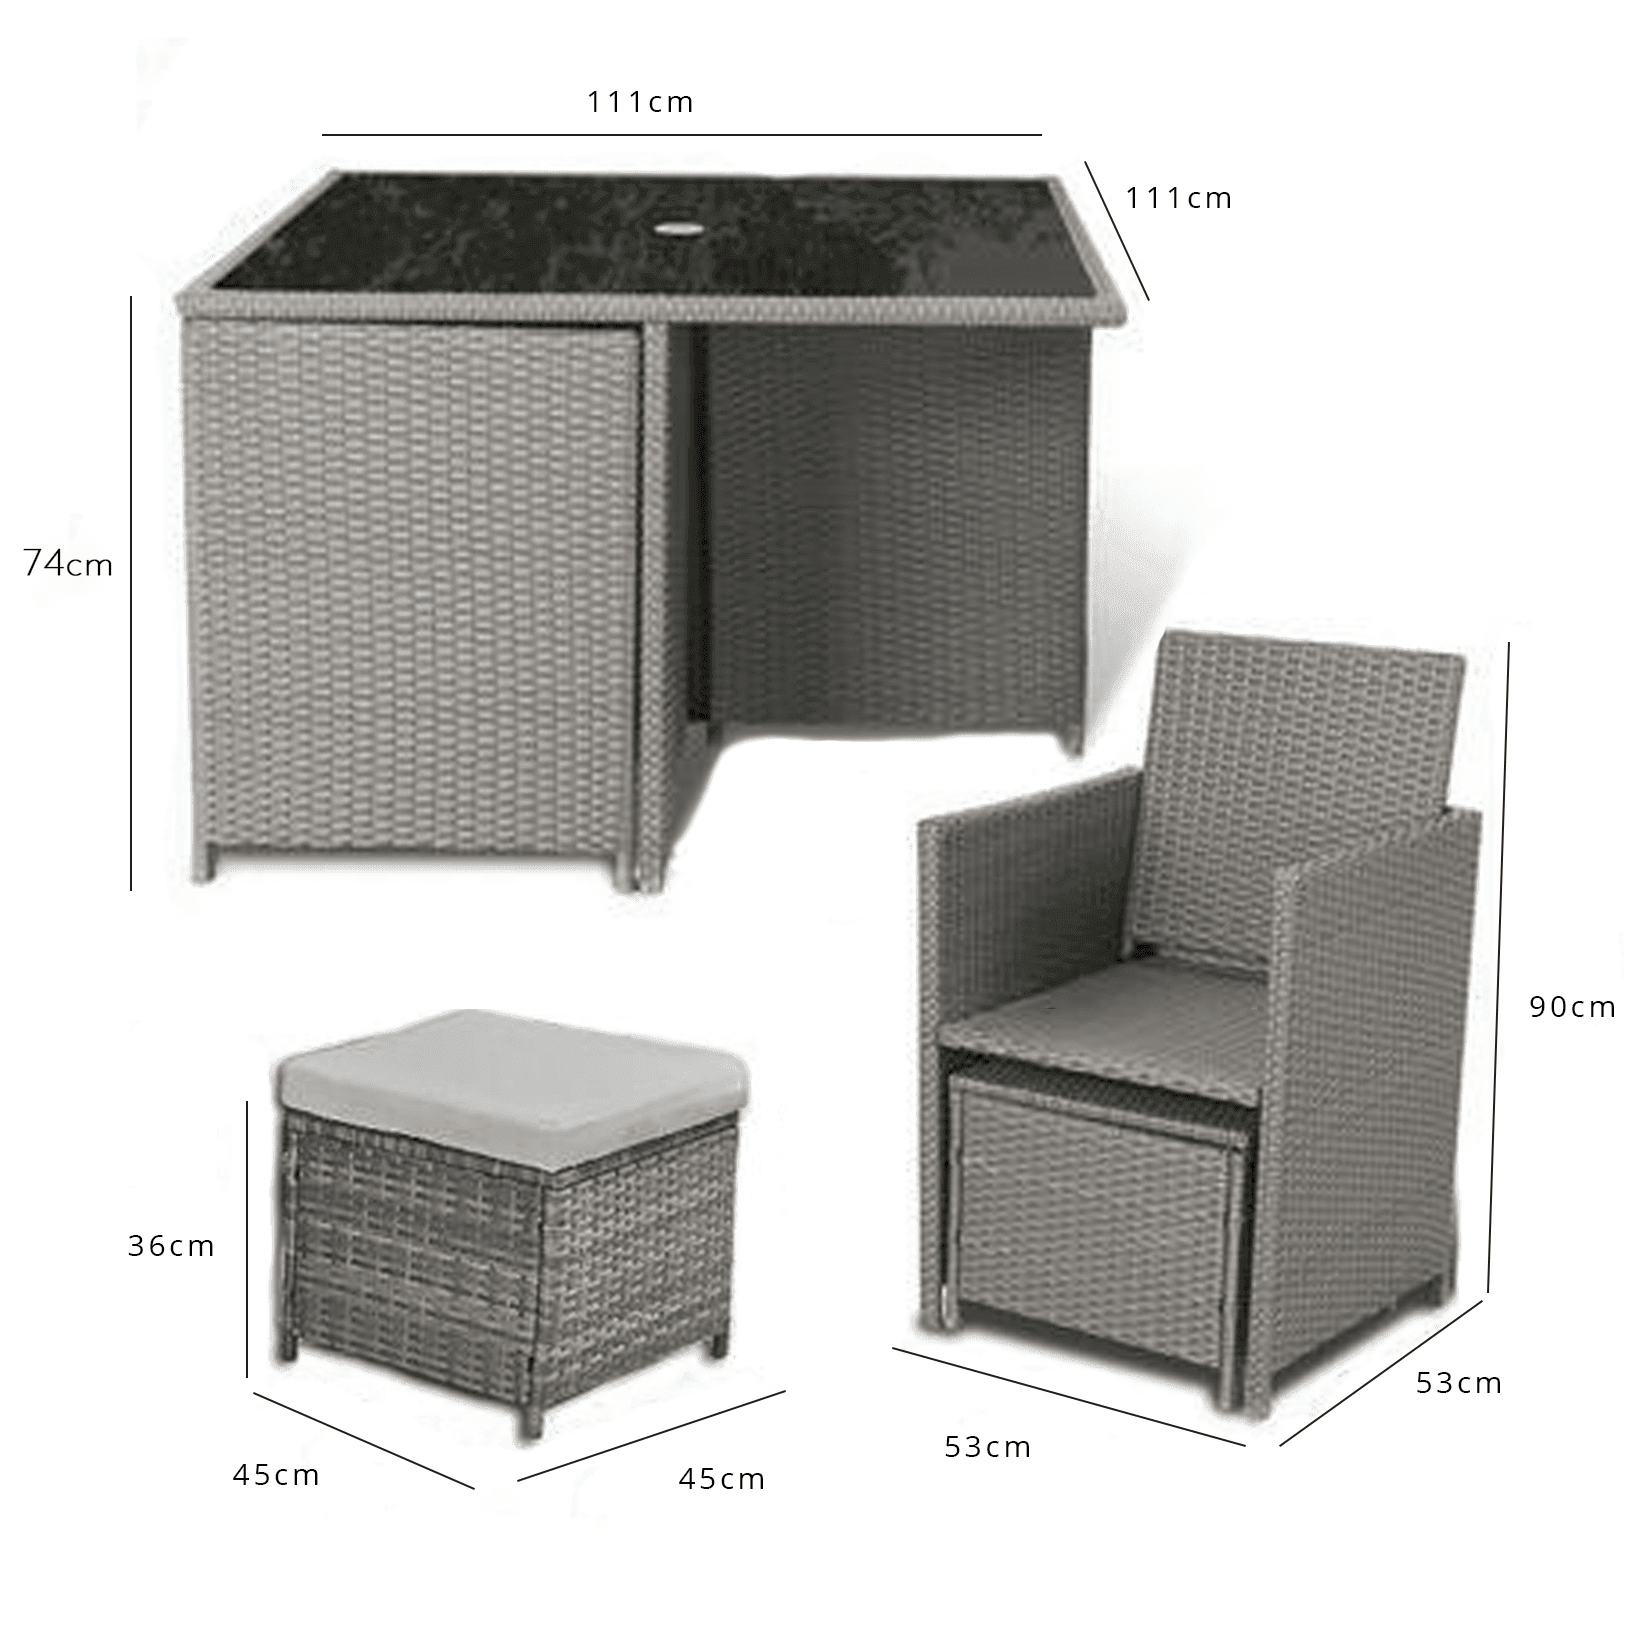 8 Seater Rattan Cube Outdoor Dining Set - Grey Weave - Laura James